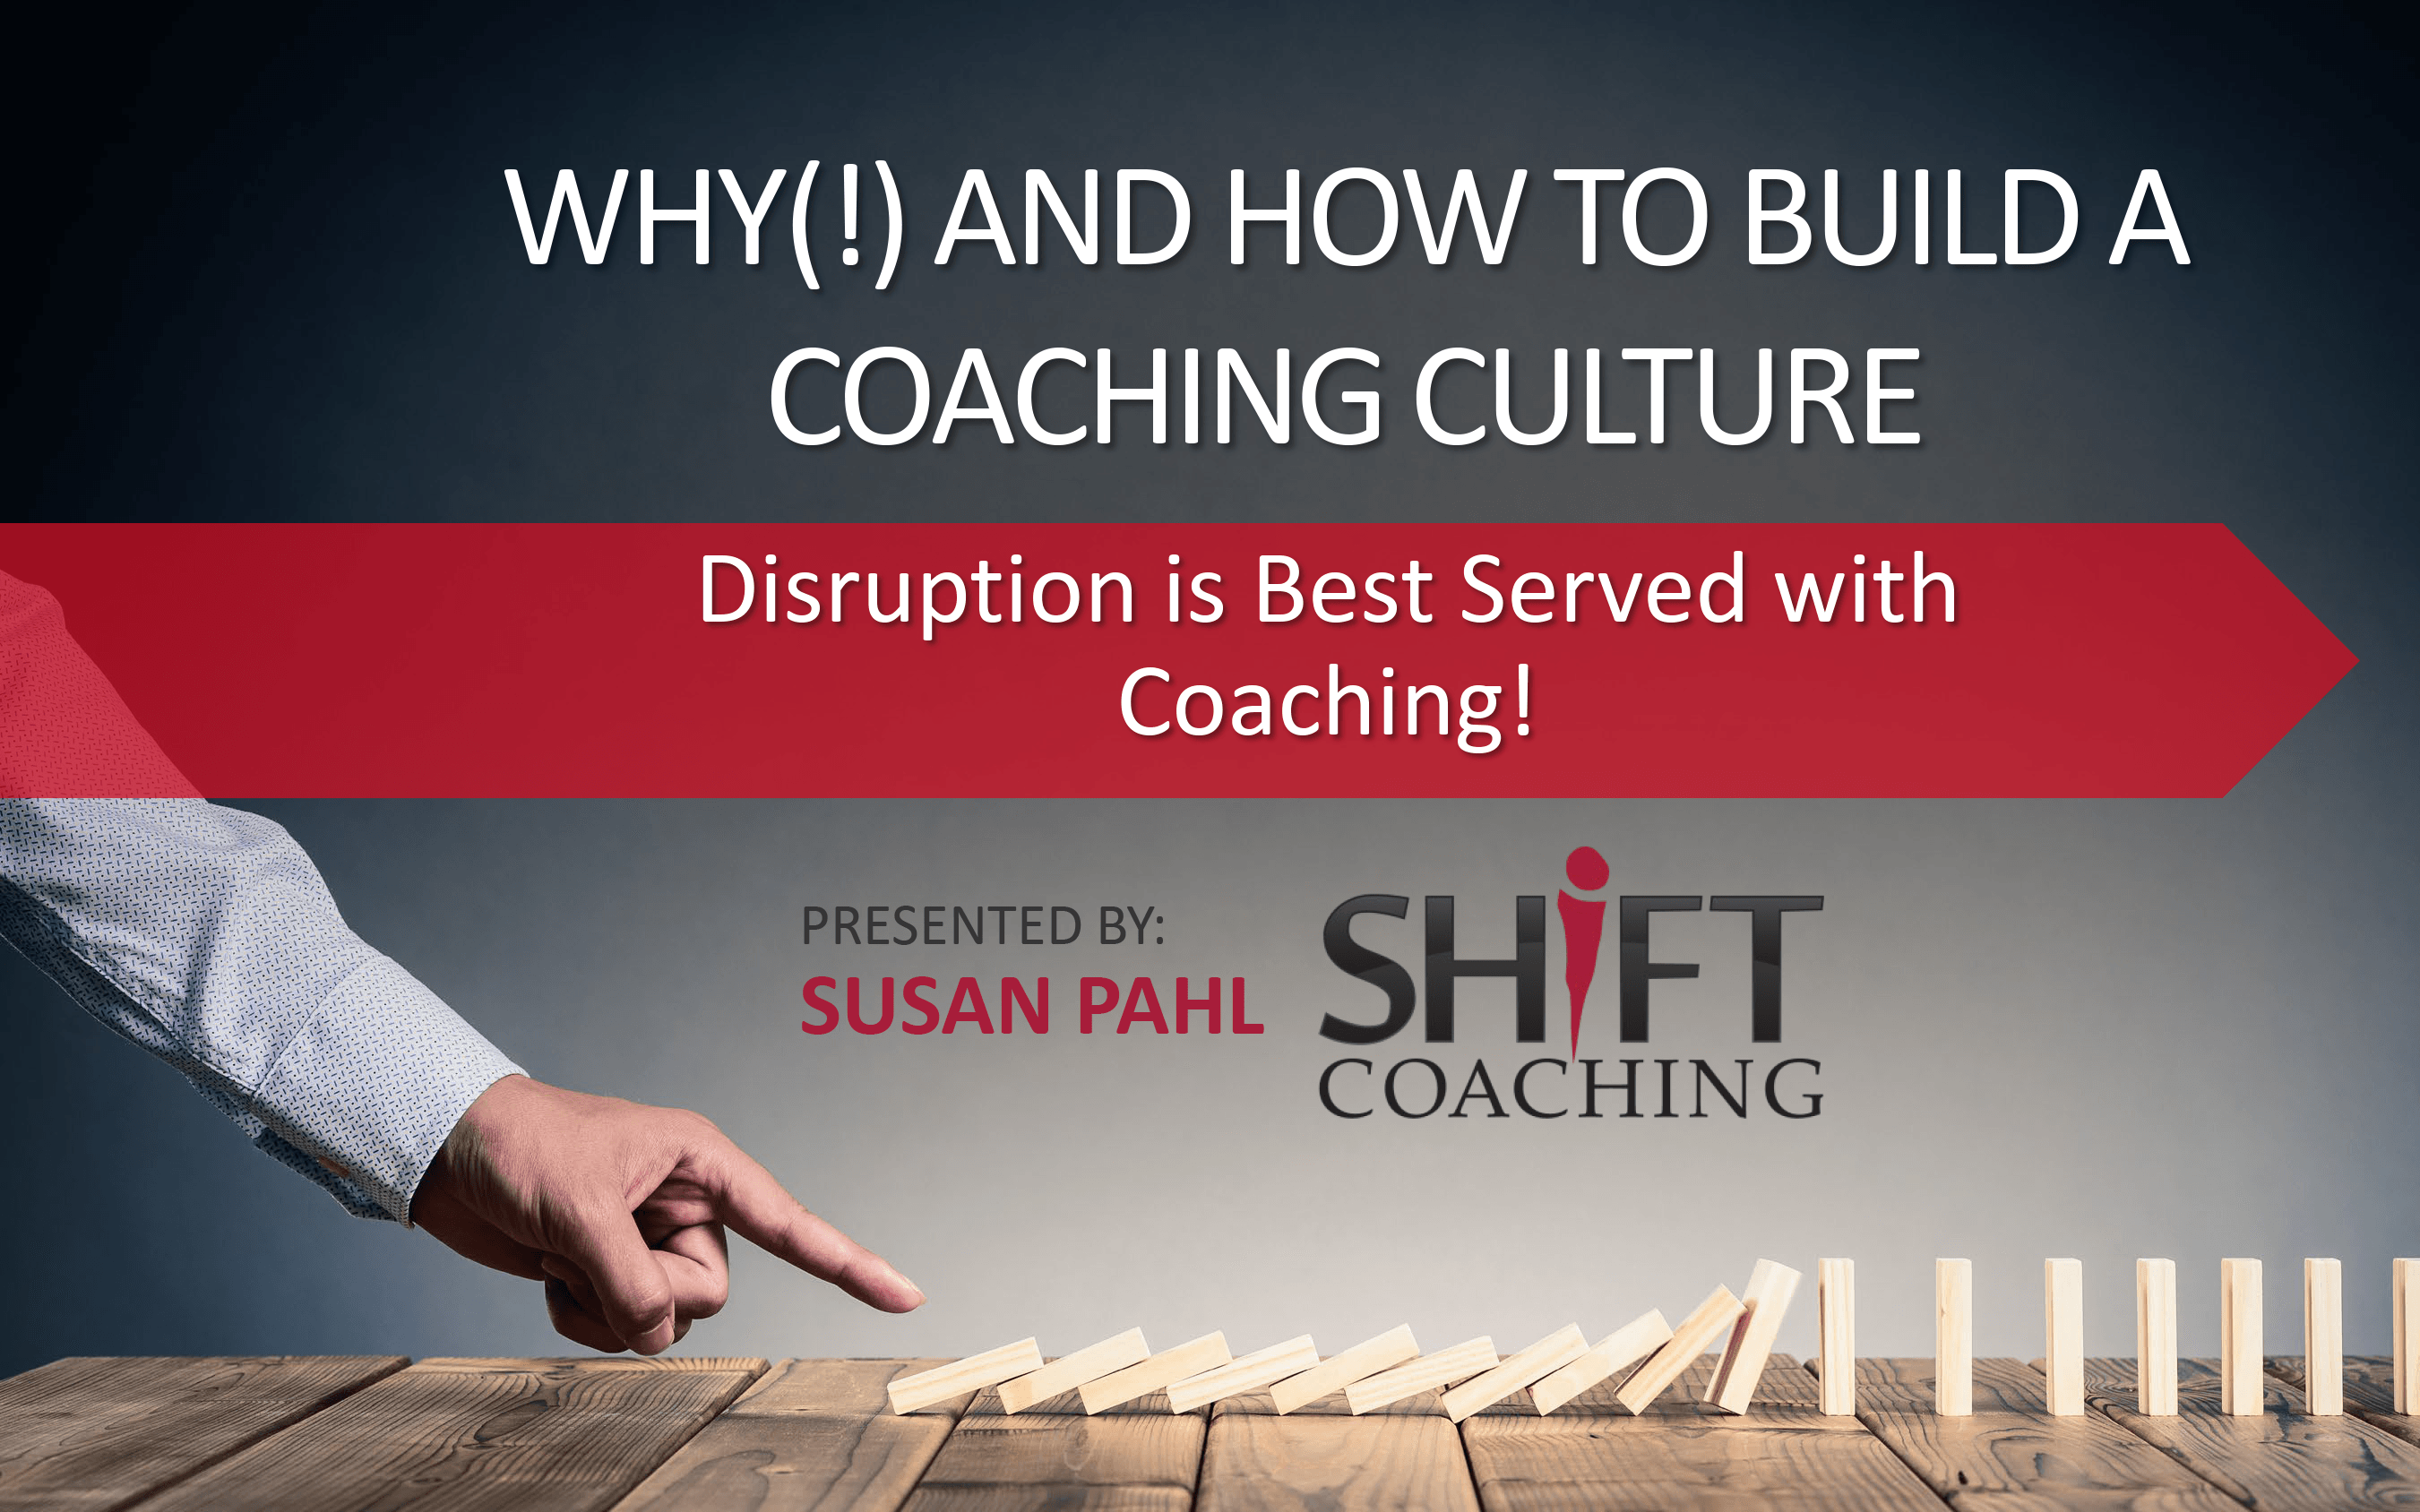 How and Why to Build a Coaching Culture